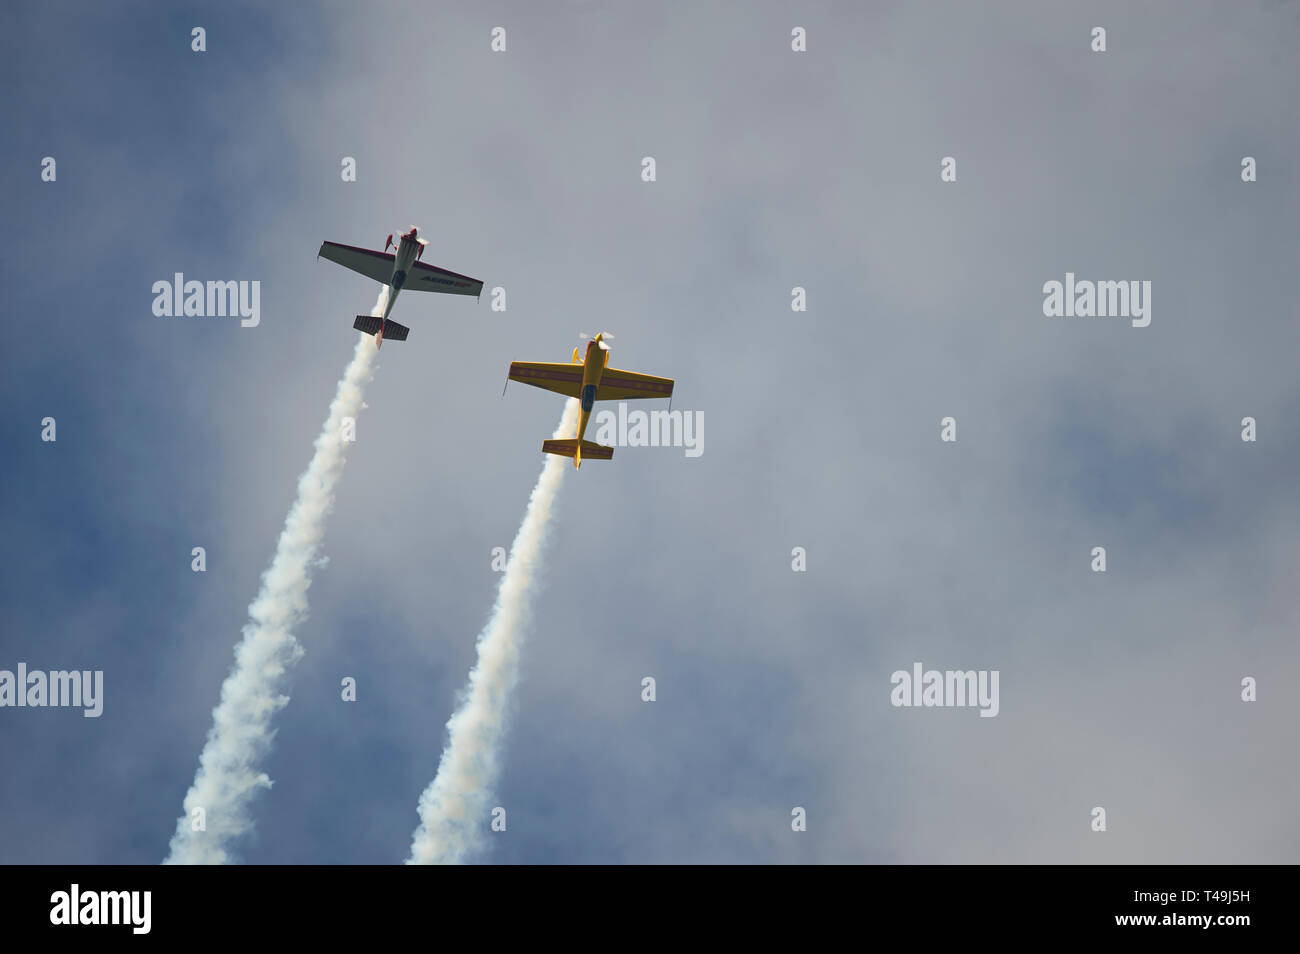 CAP 231 Stunt Aircraft during a display with smoke trails against a blue summer sky Stock Photo